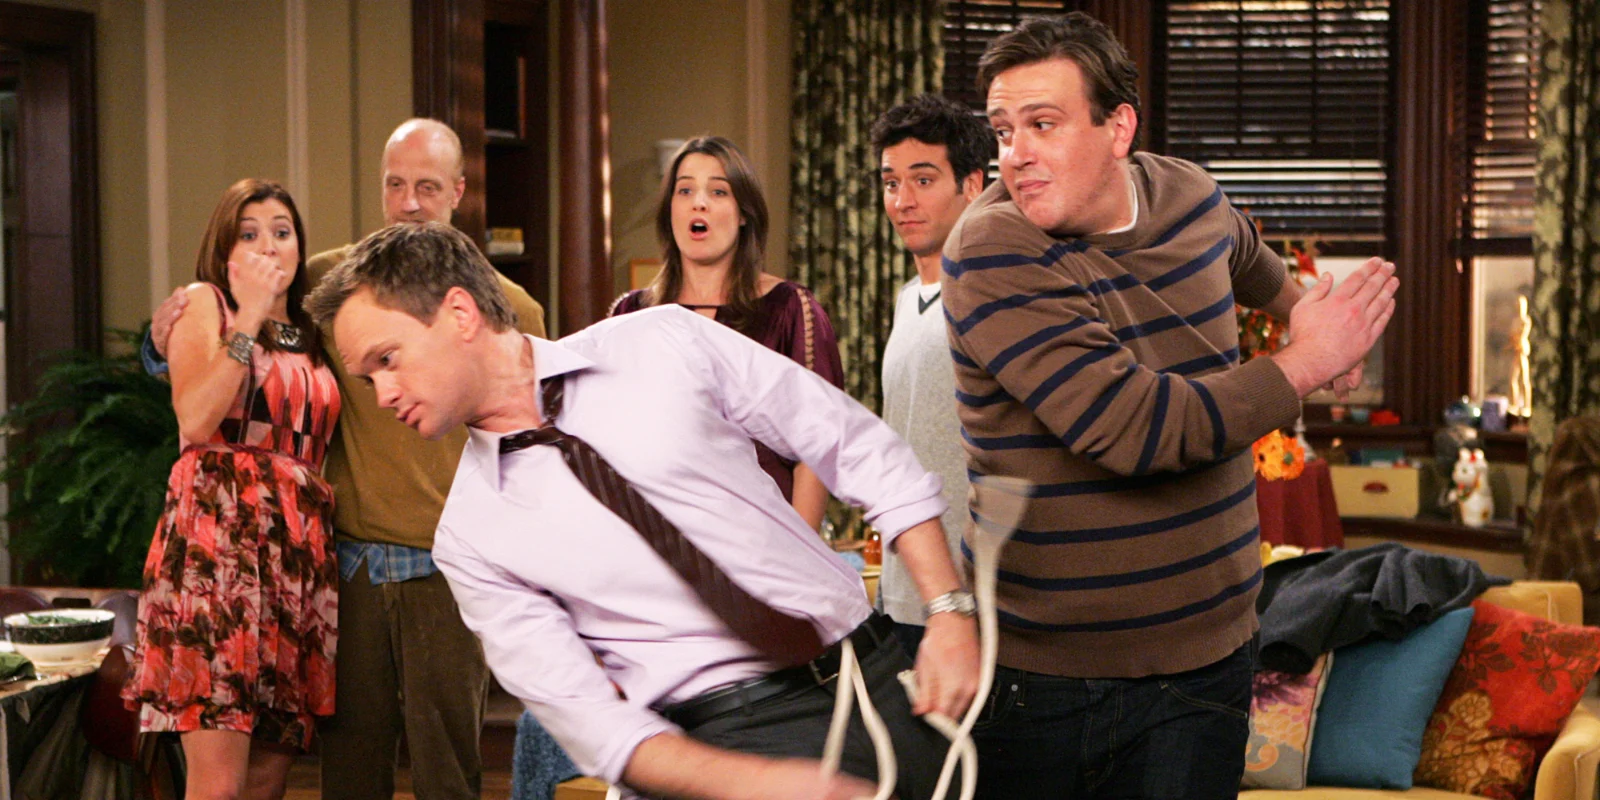 Marshall slaps Barney in How I Met Your Mother.